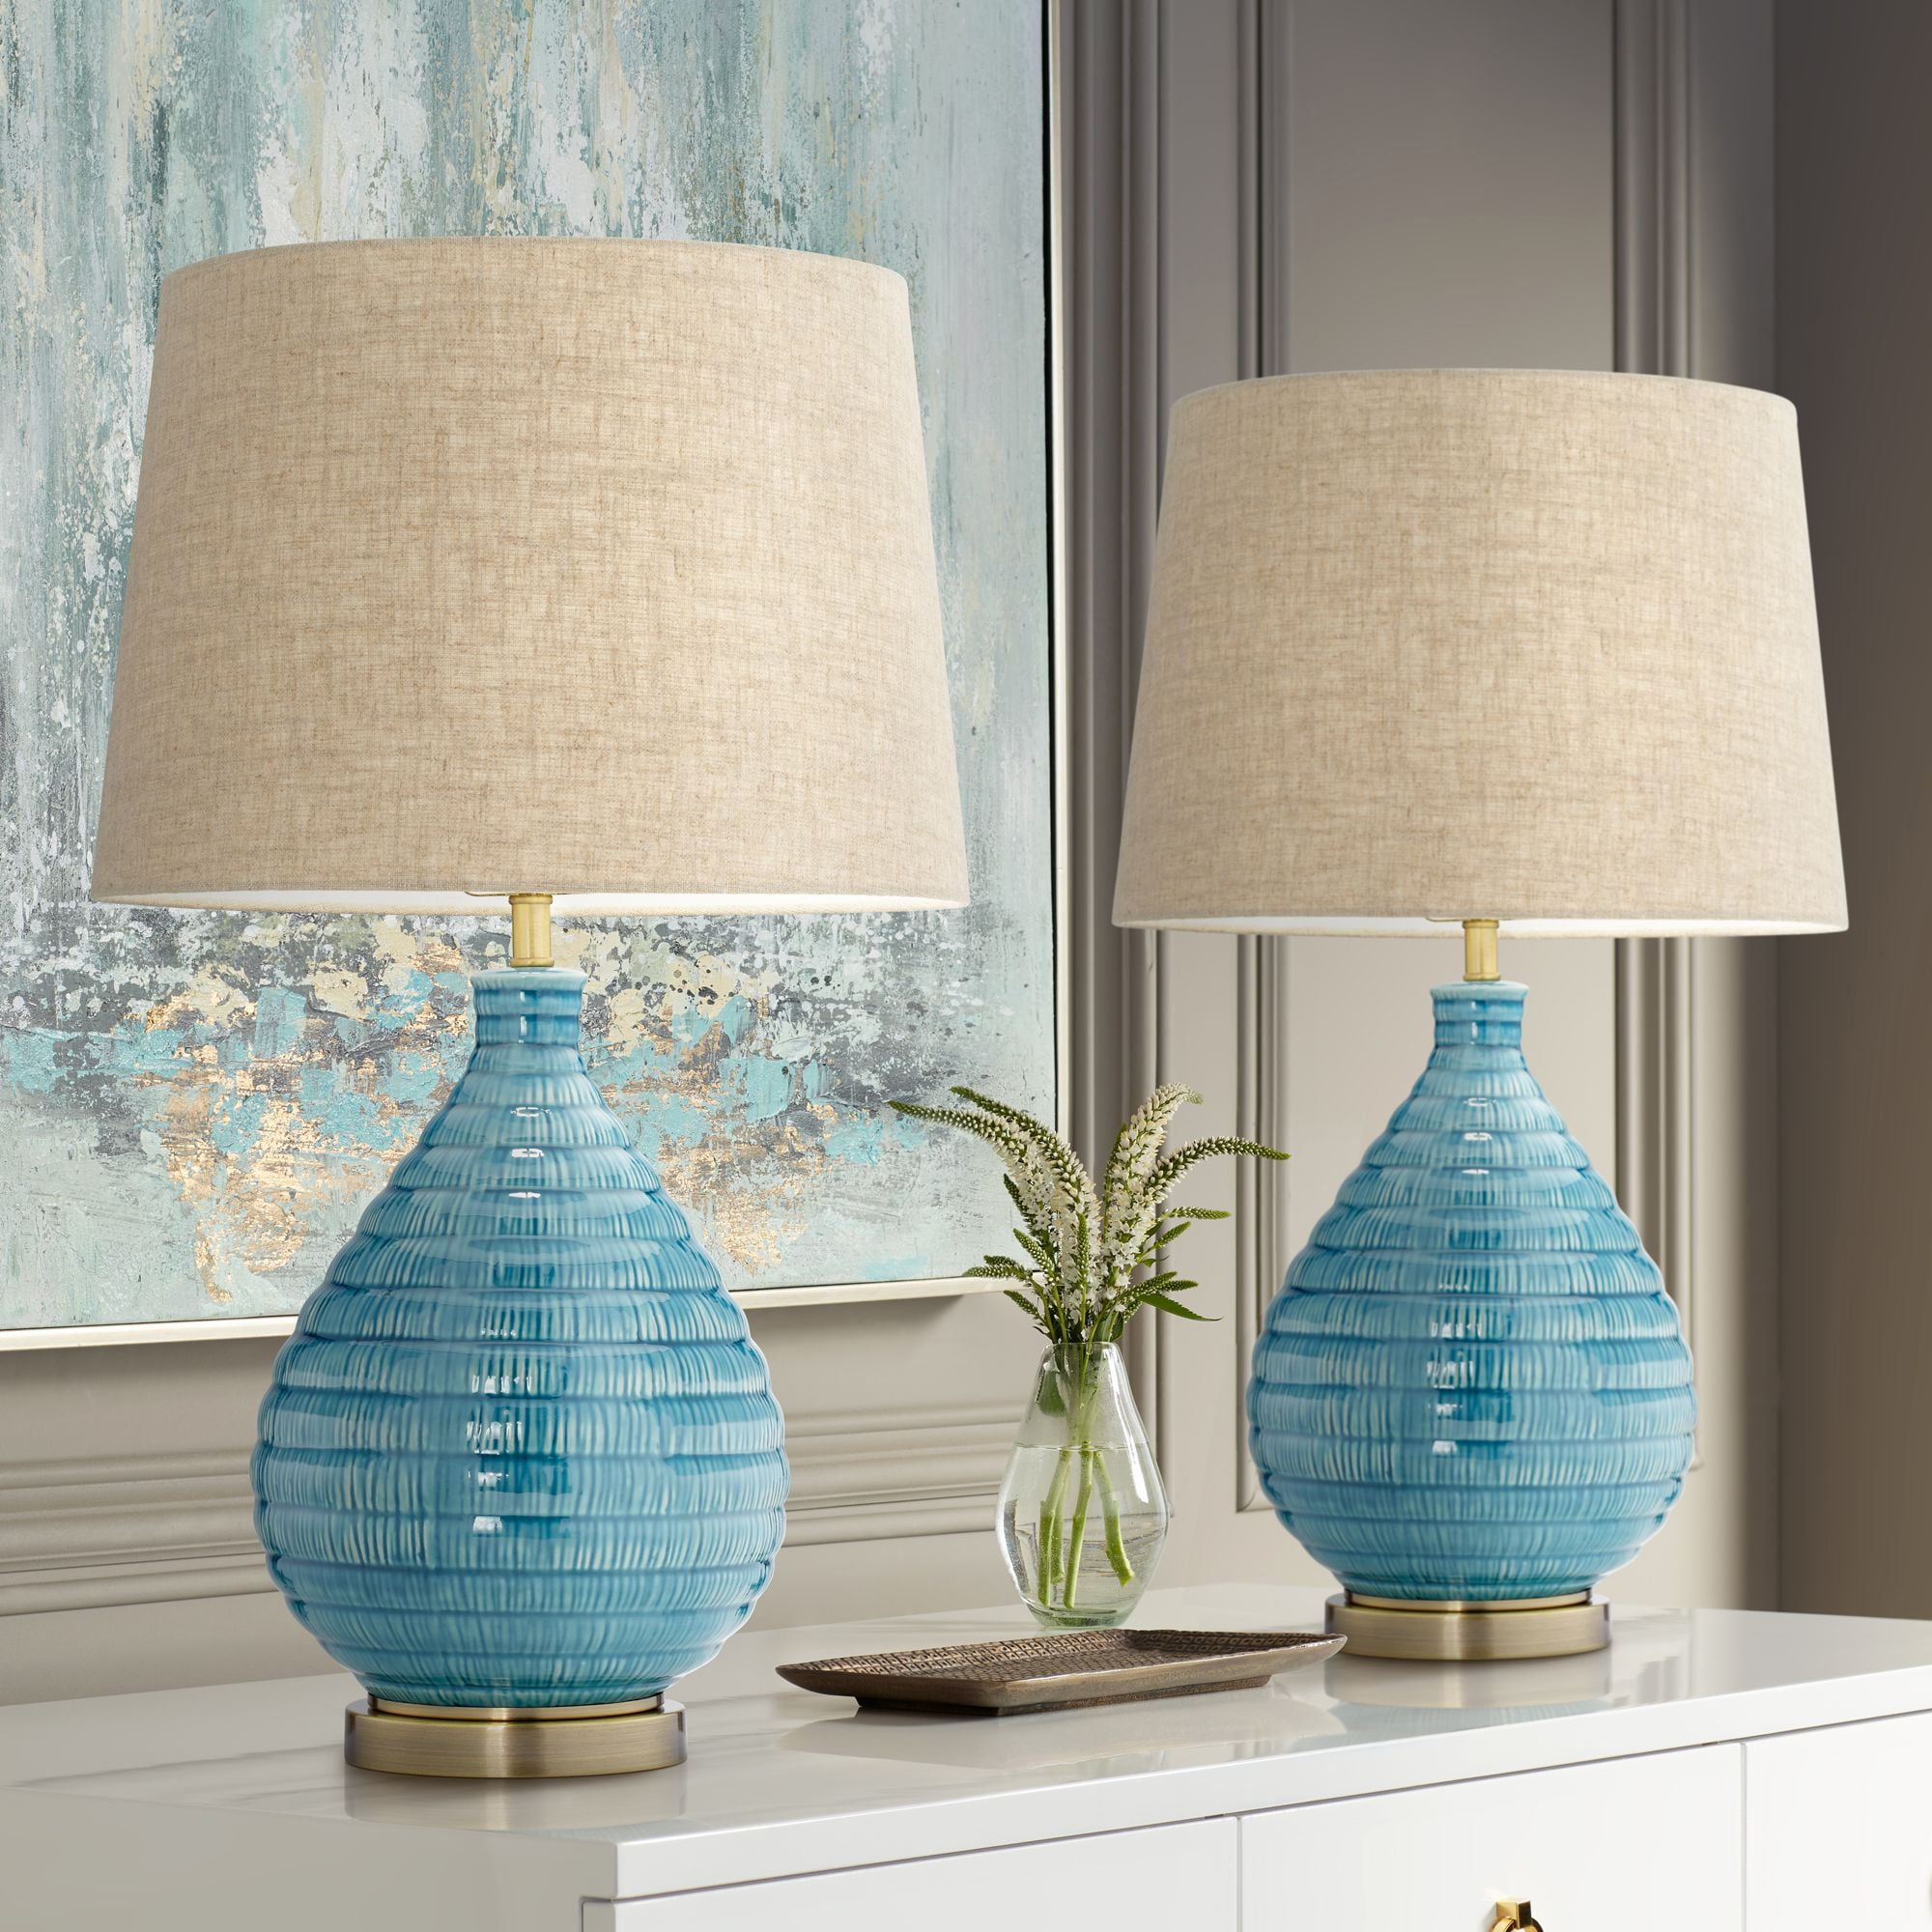 360 Lighting Modern Table Lamps Set Of, Set Of Two Ceramic Table Lamps